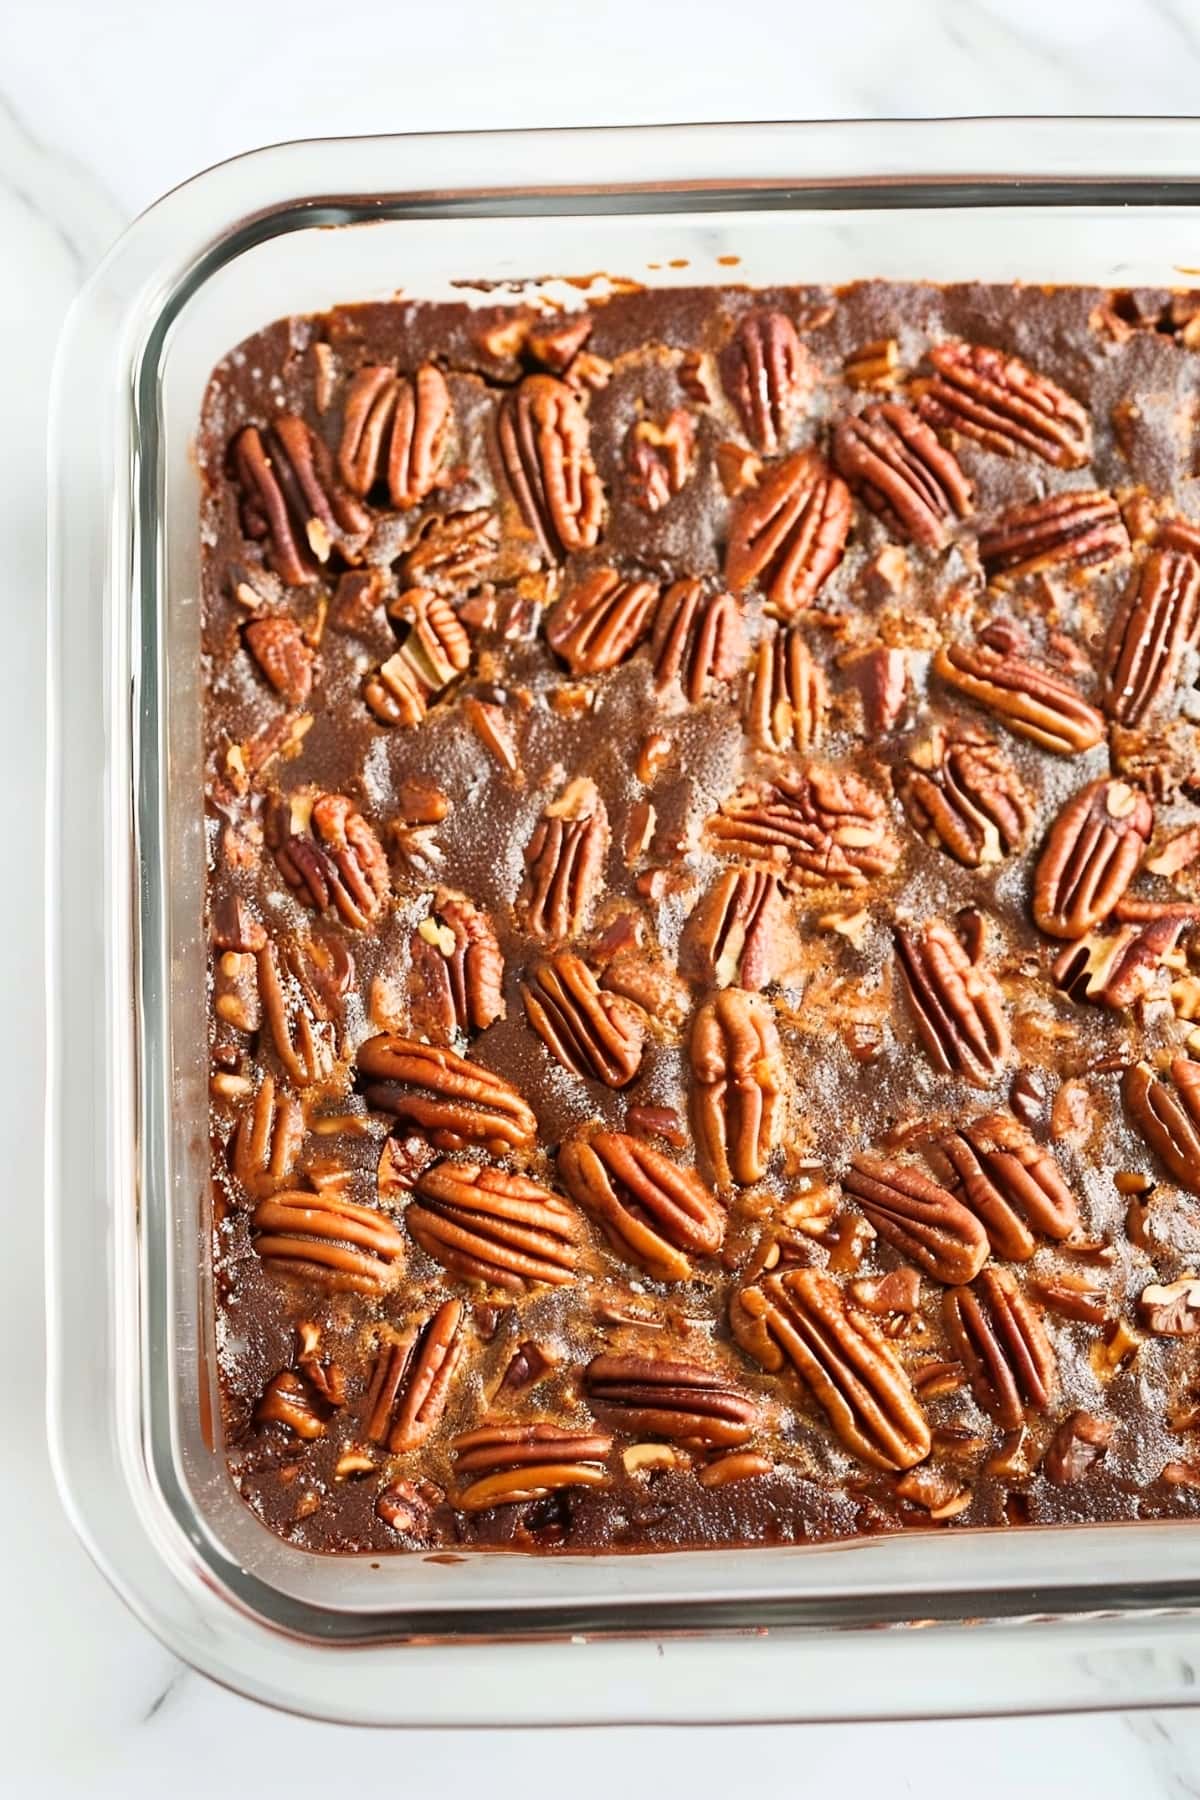 Whole pecan pie brownies in a glass baking dish